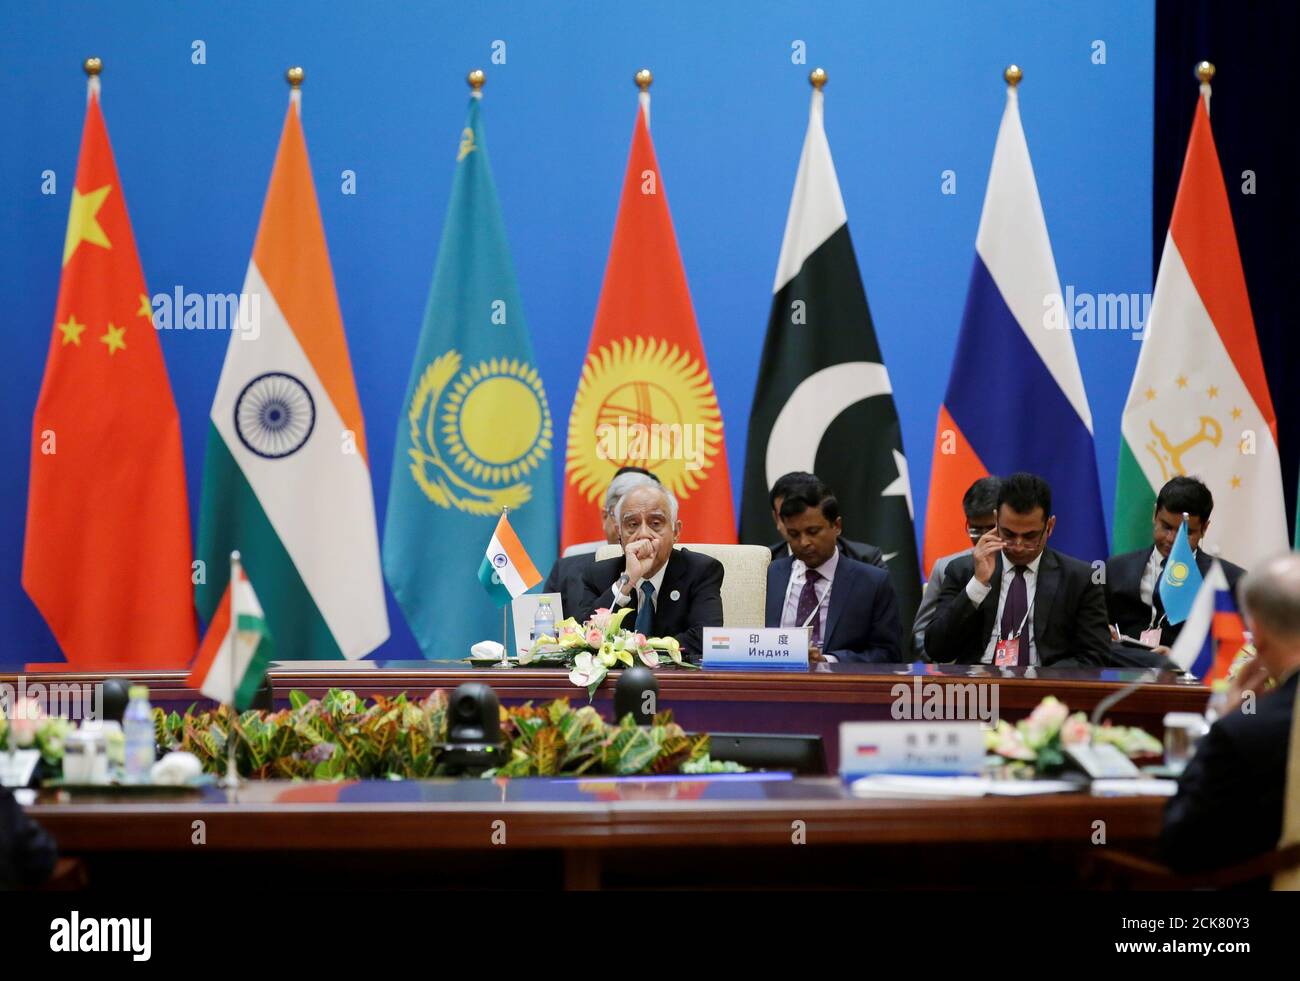 Indian delegation attend a plenary meeting of the Shanghai Cooperation Organization (SCO) security secretary summit in Beijing, China, May 22, 2018. REUTERS/Jason Lee/Pool Stock Photo